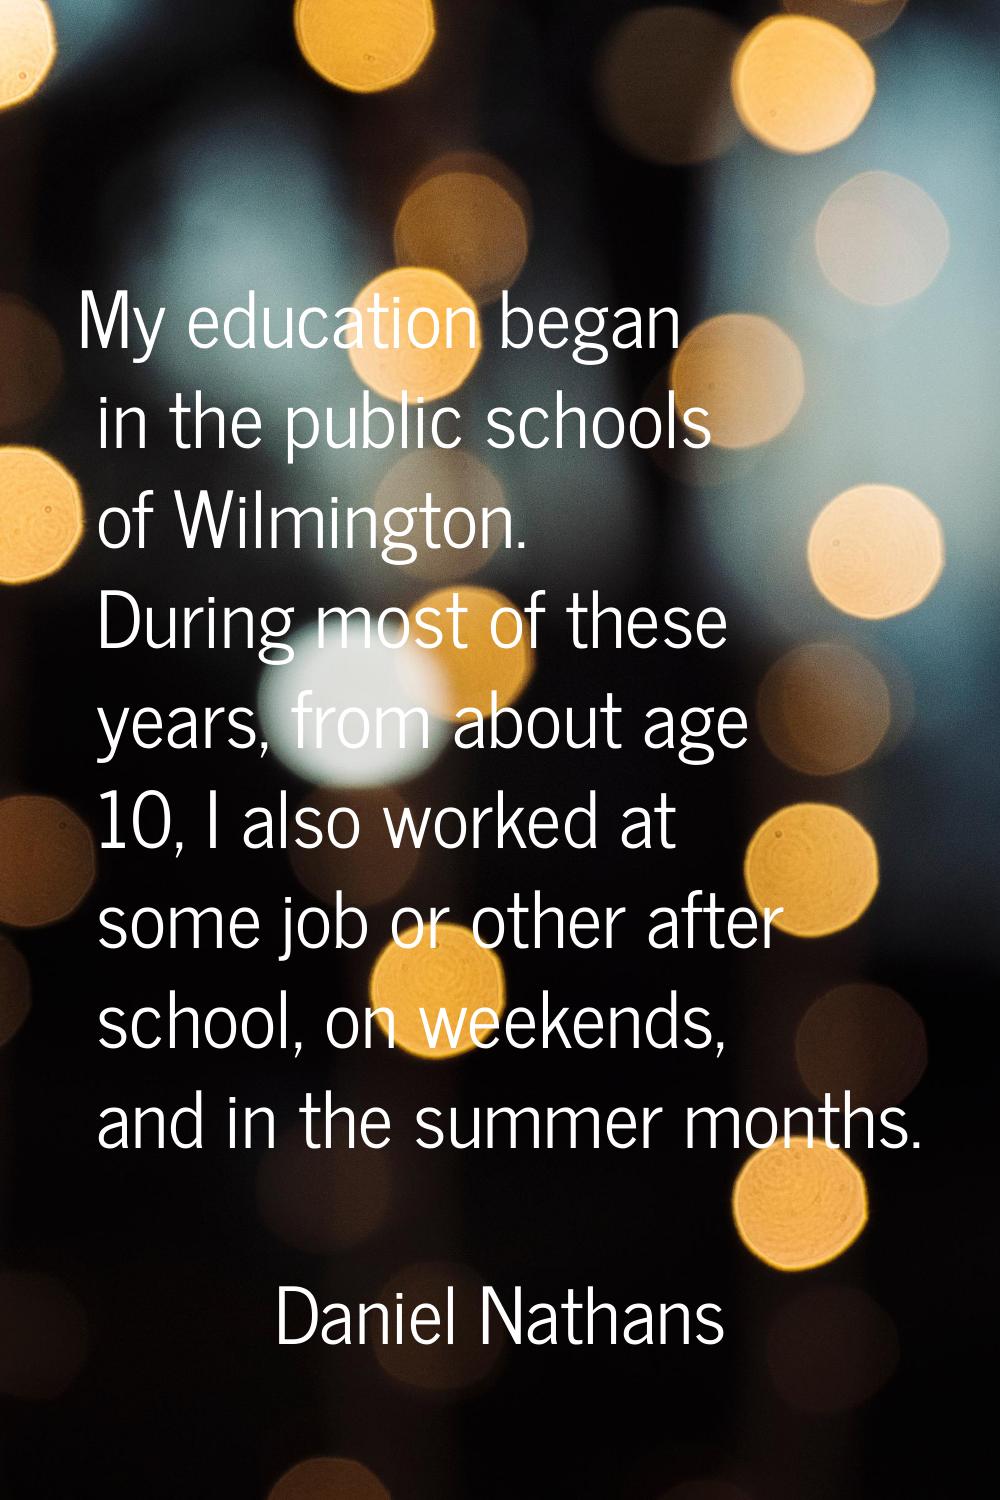 My education began in the public schools of Wilmington. During most of these years, from about age 